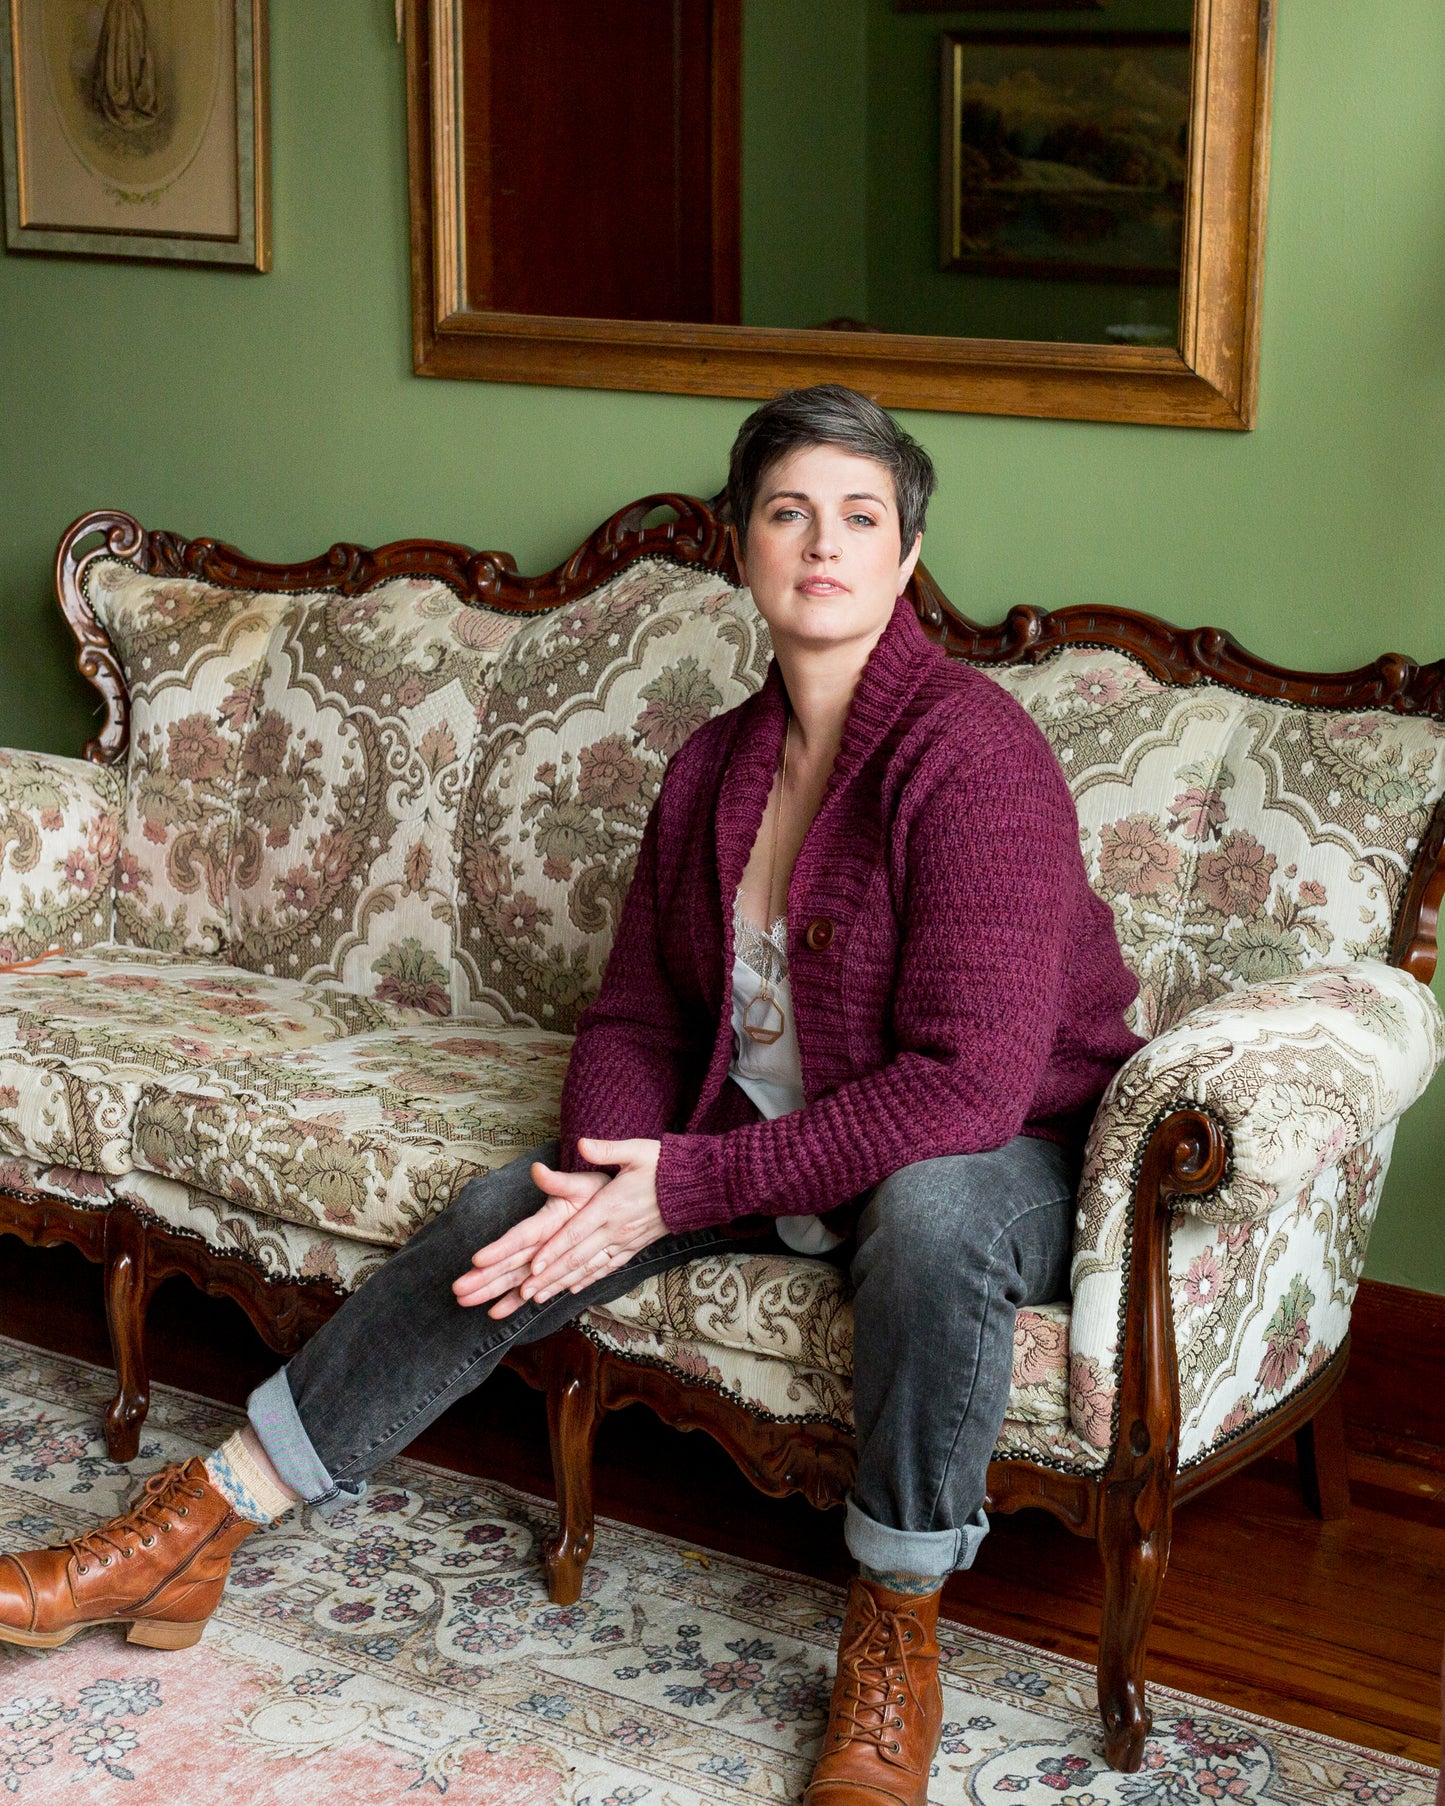 Jen sits on an antique couch, leaning forward slightly to look in the camera. She wears a burgundy cardigan with brown boots and grey jeans. The cardigan is knit with a cowl neck and a subtle all-over stitch pattern.